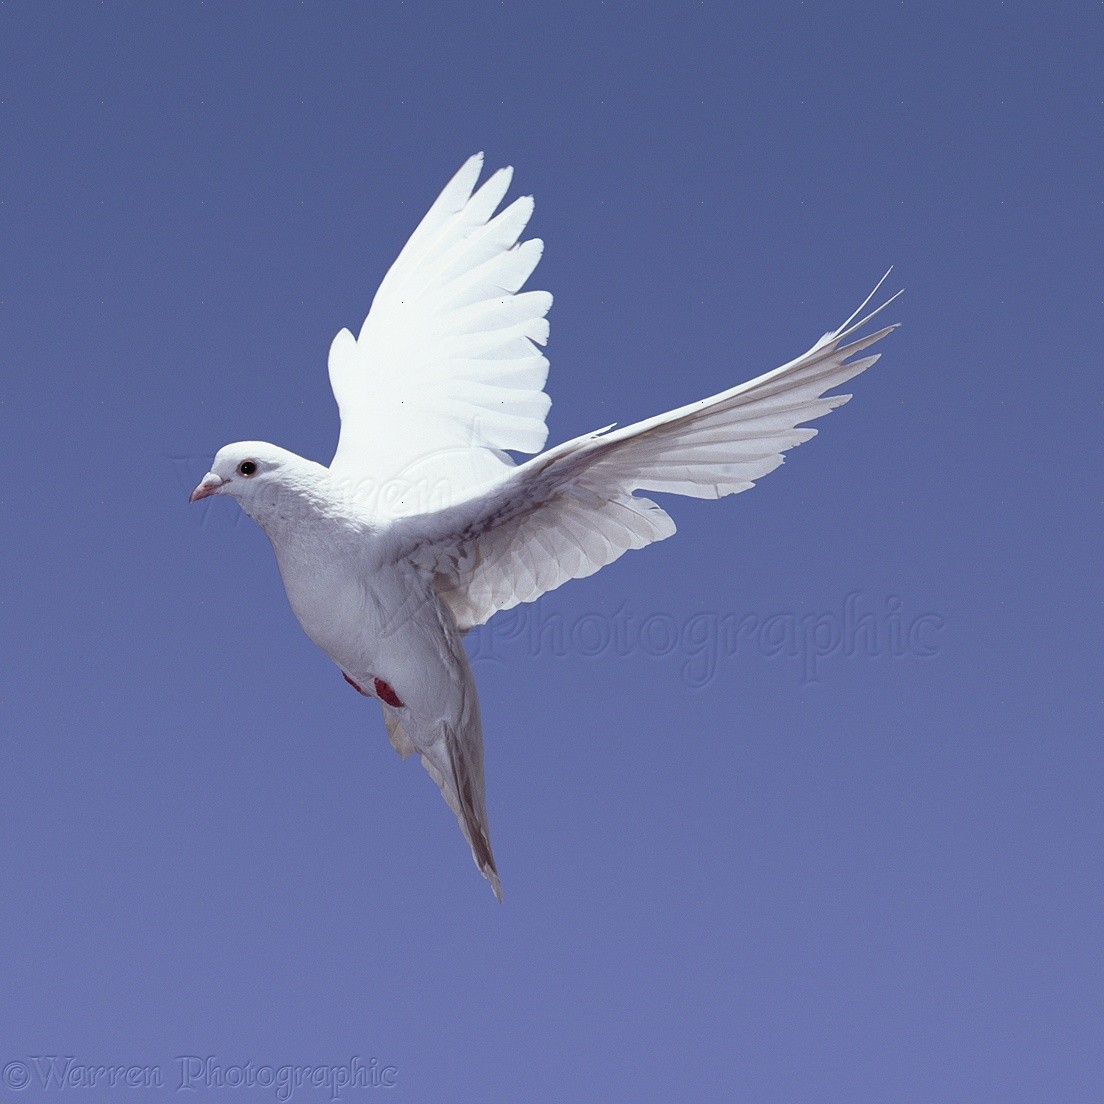 White pigeon in flight series - 3 of 7 photo WP06616